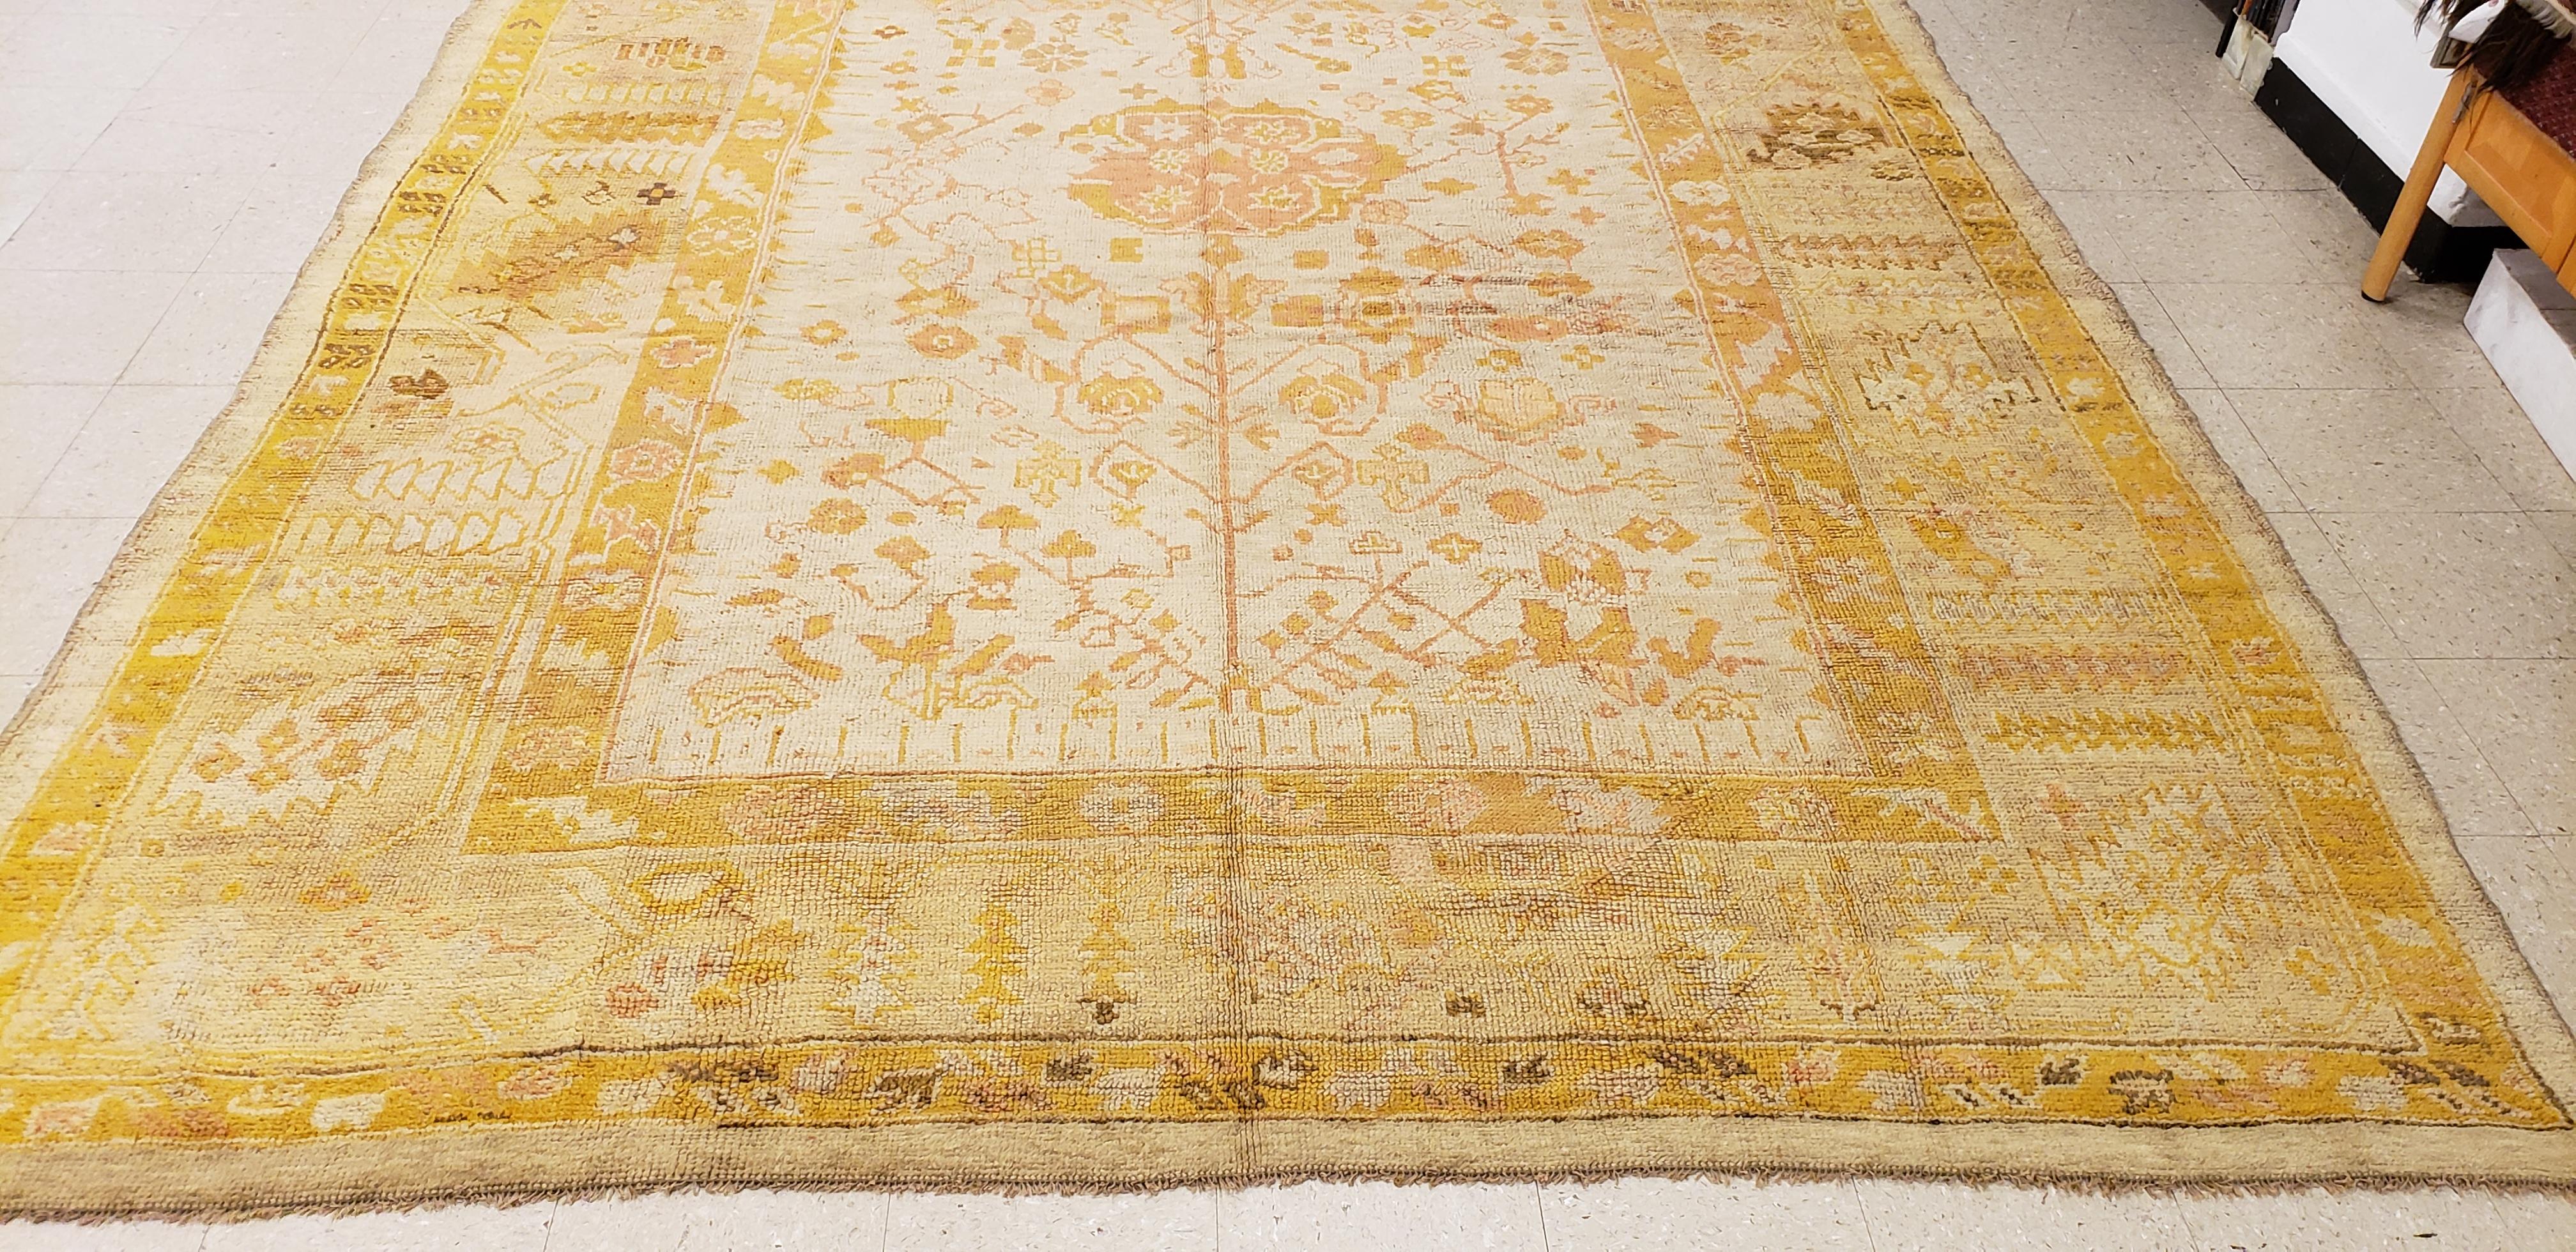 Antique Oushak Carpet, Handmade Oriental Rug, Pale Blue Green, Yellow, Coral Rug For Sale 8